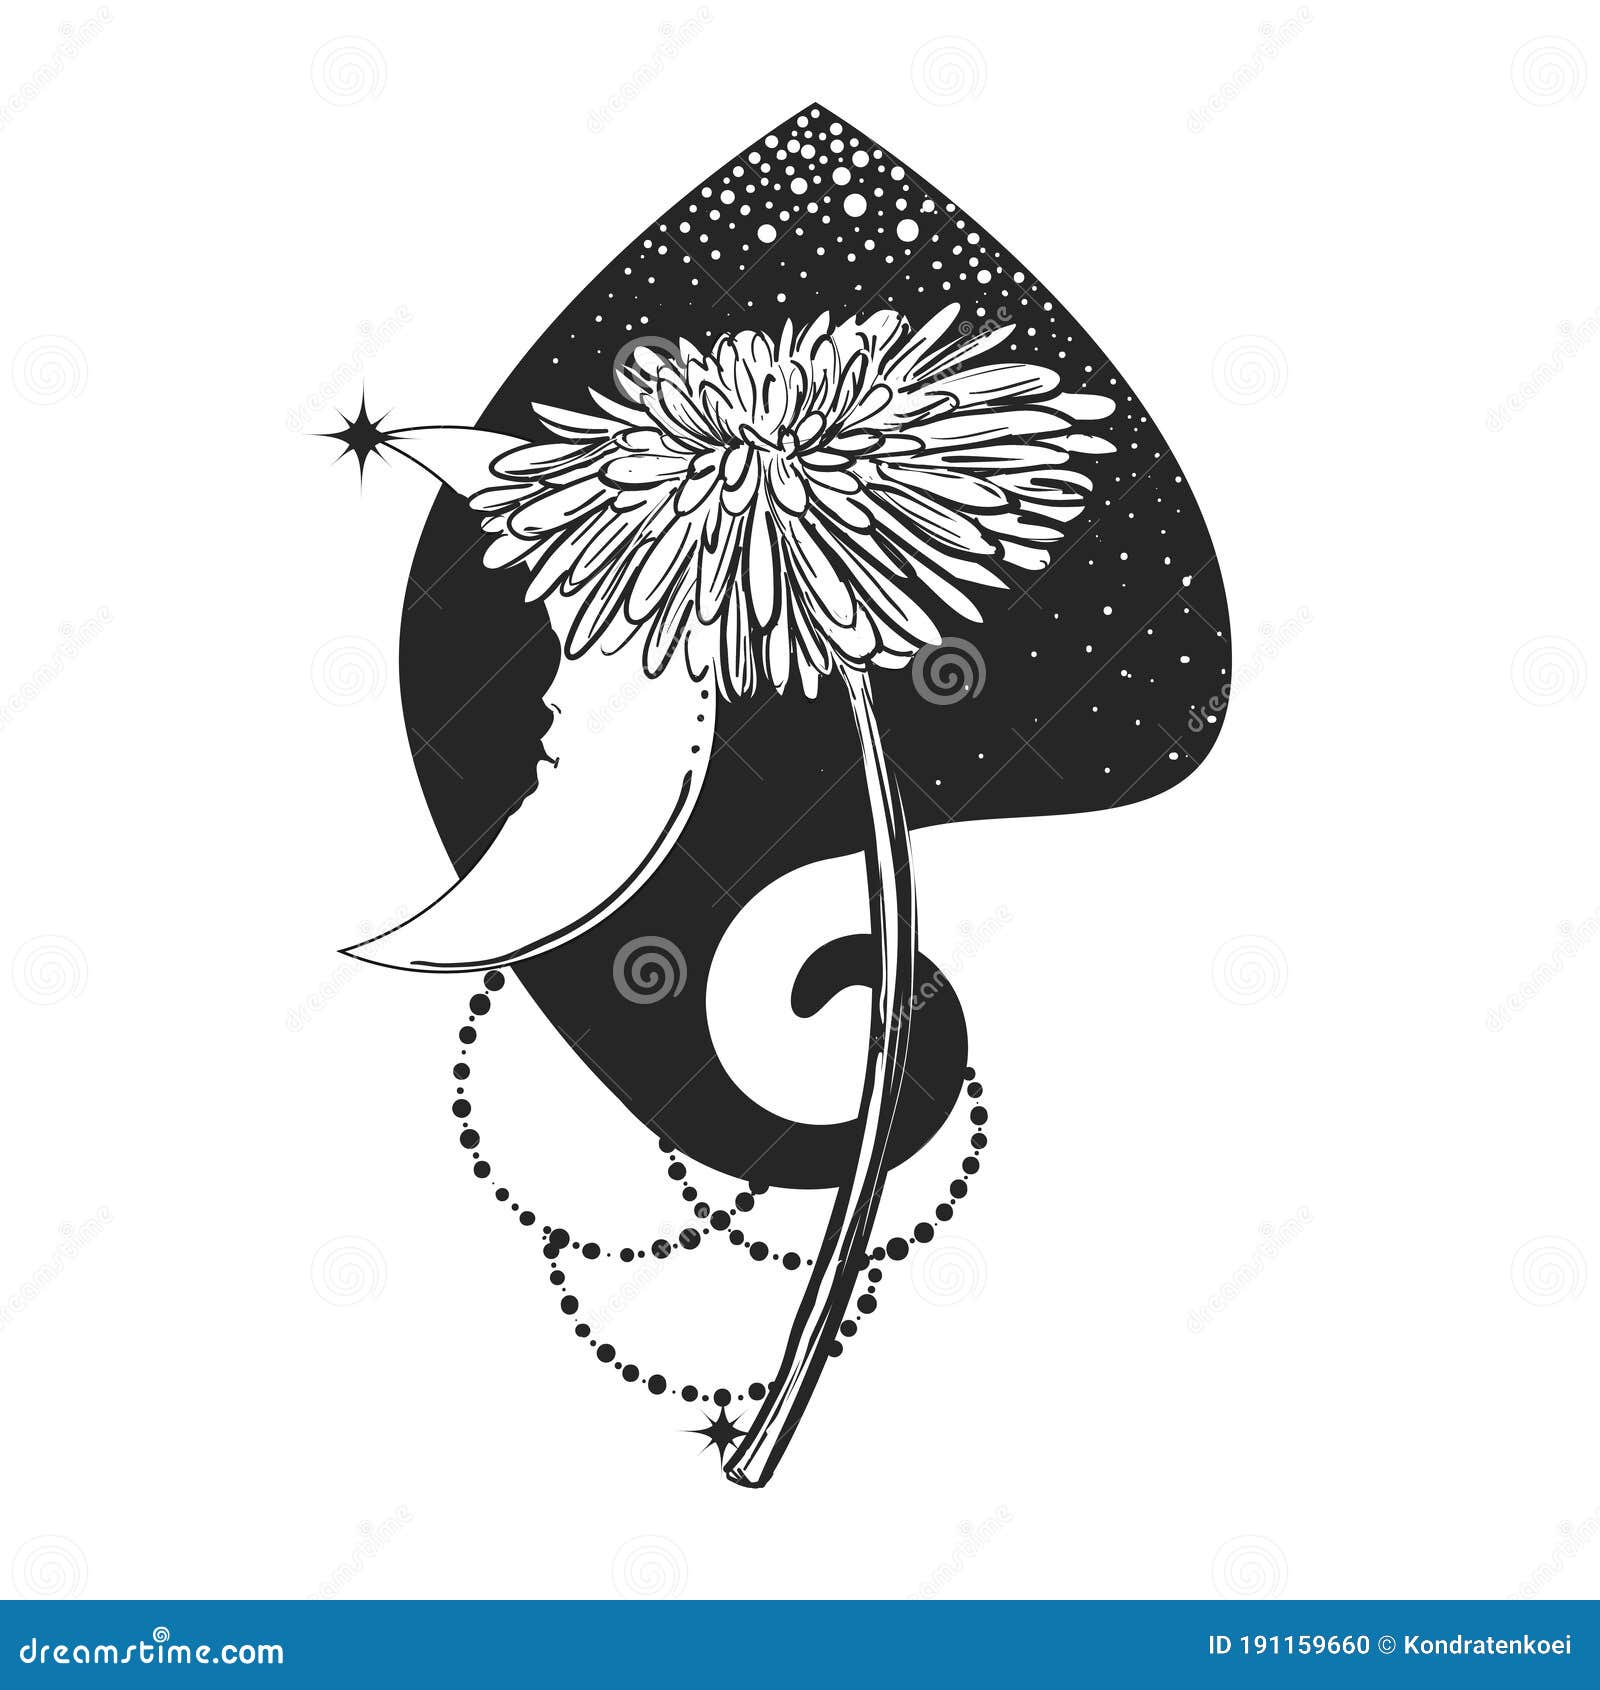 Dandelion Tattoo. Flower in a Black Spot with a Star. Vector Black and  White Illustration Art. Stock Vector - Illustration of print, decoration:  191159660